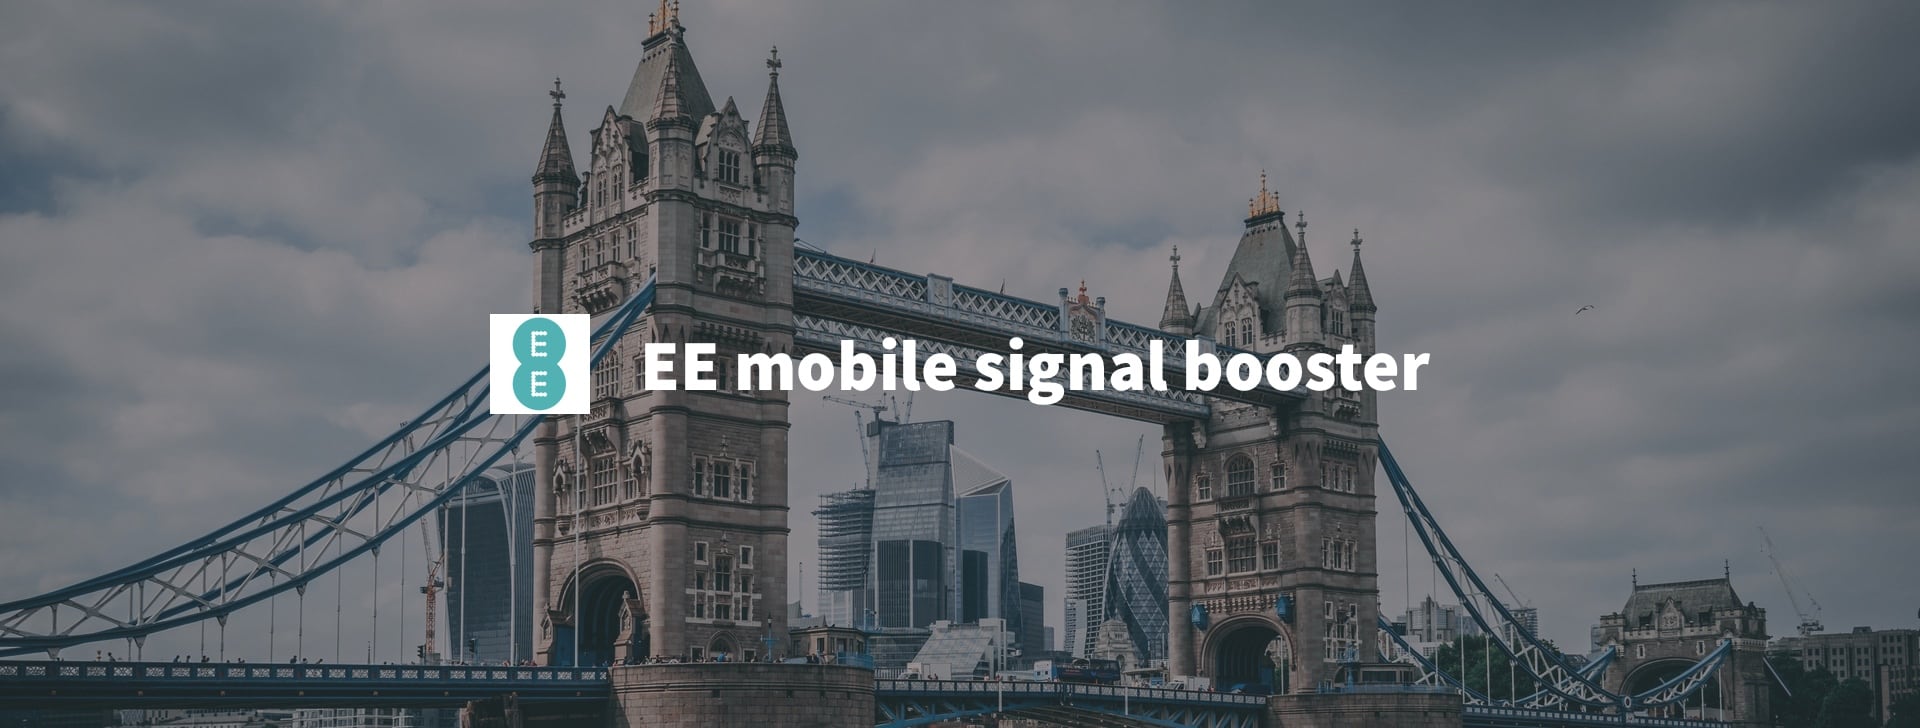 EE mobile phone signal booster